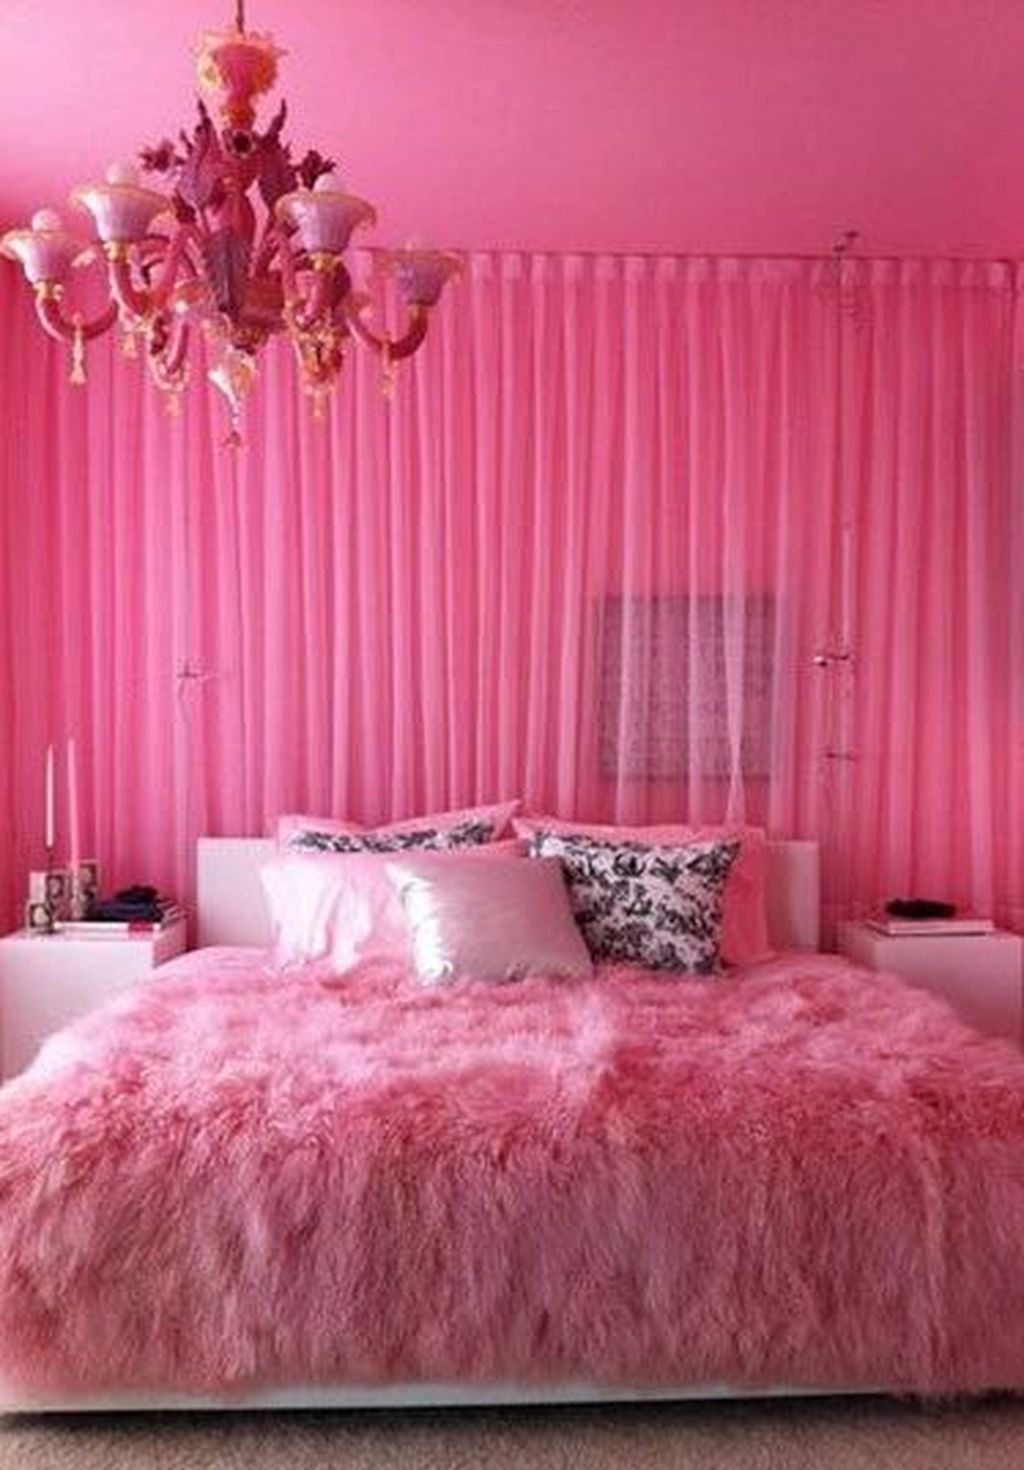 A pink bedroom with chandelier and curtains - Hot pink